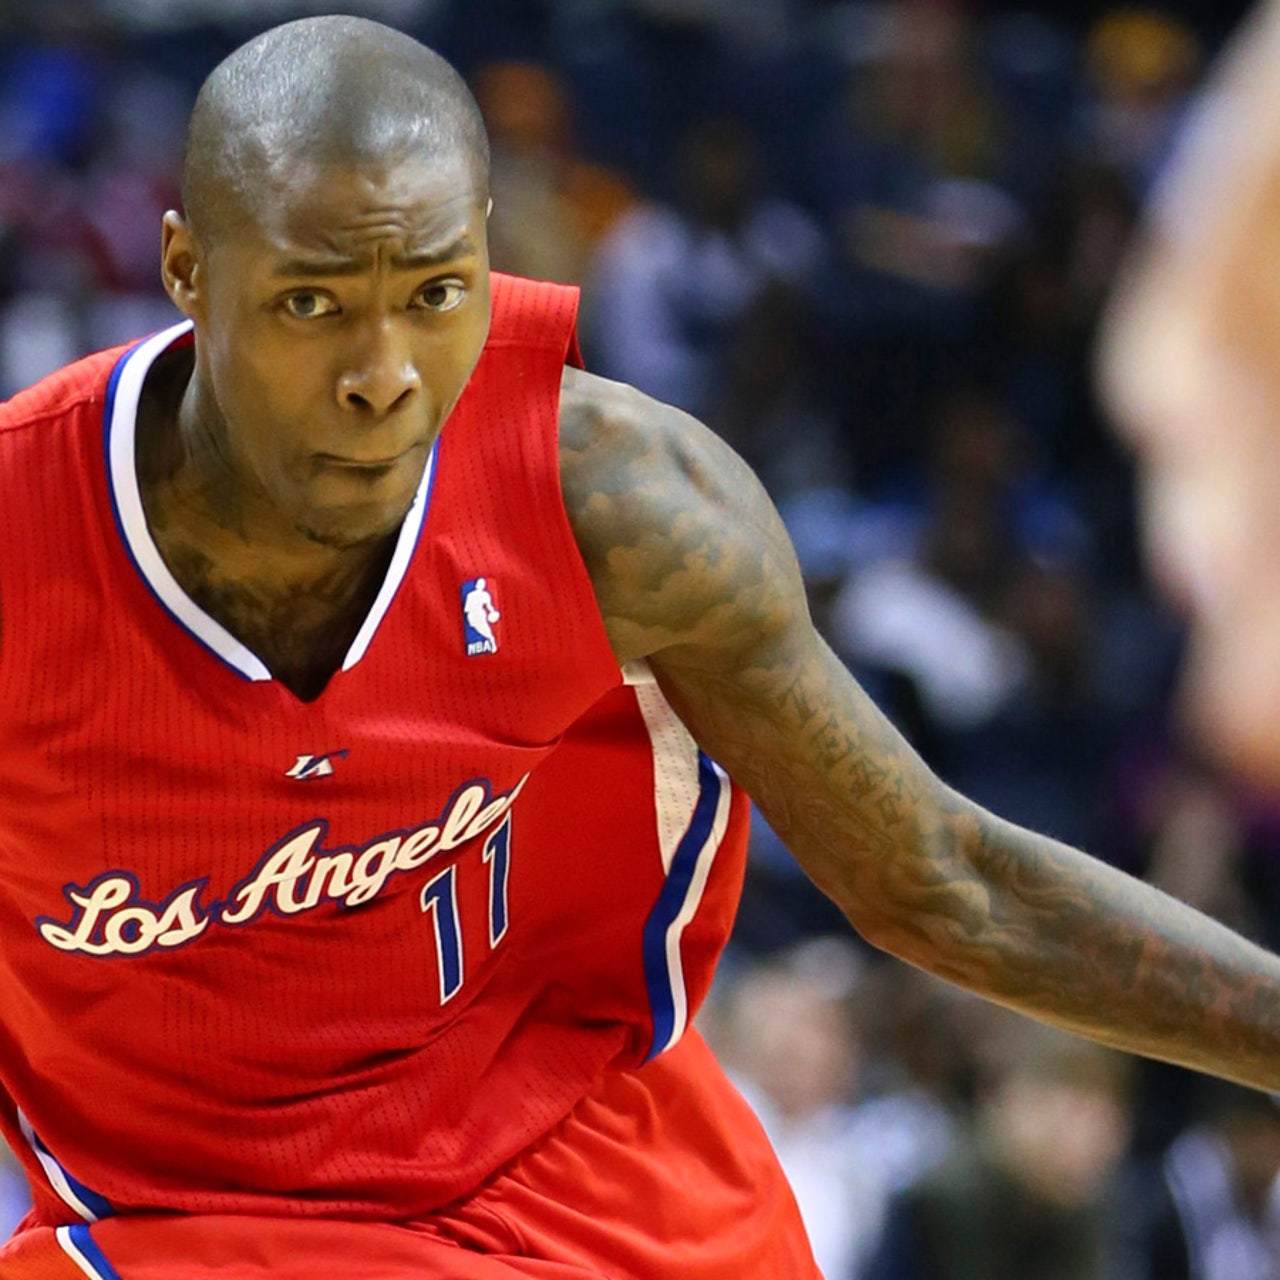 Jamal Crawford looking like odd man out for Clippers